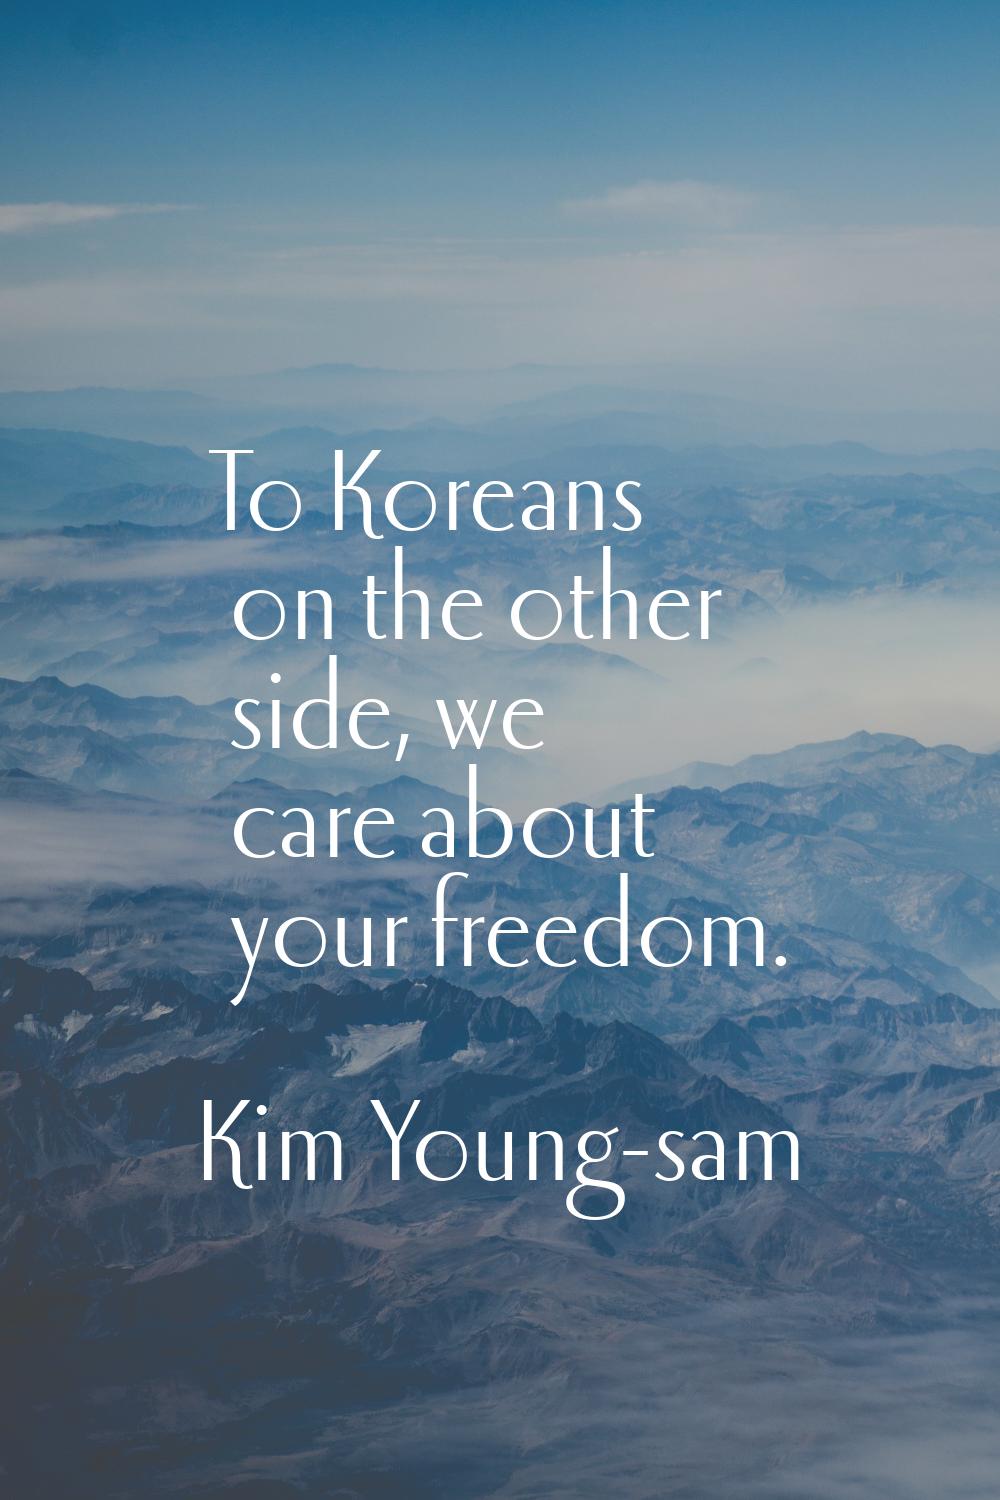 To Koreans on the other side, we care about your freedom.